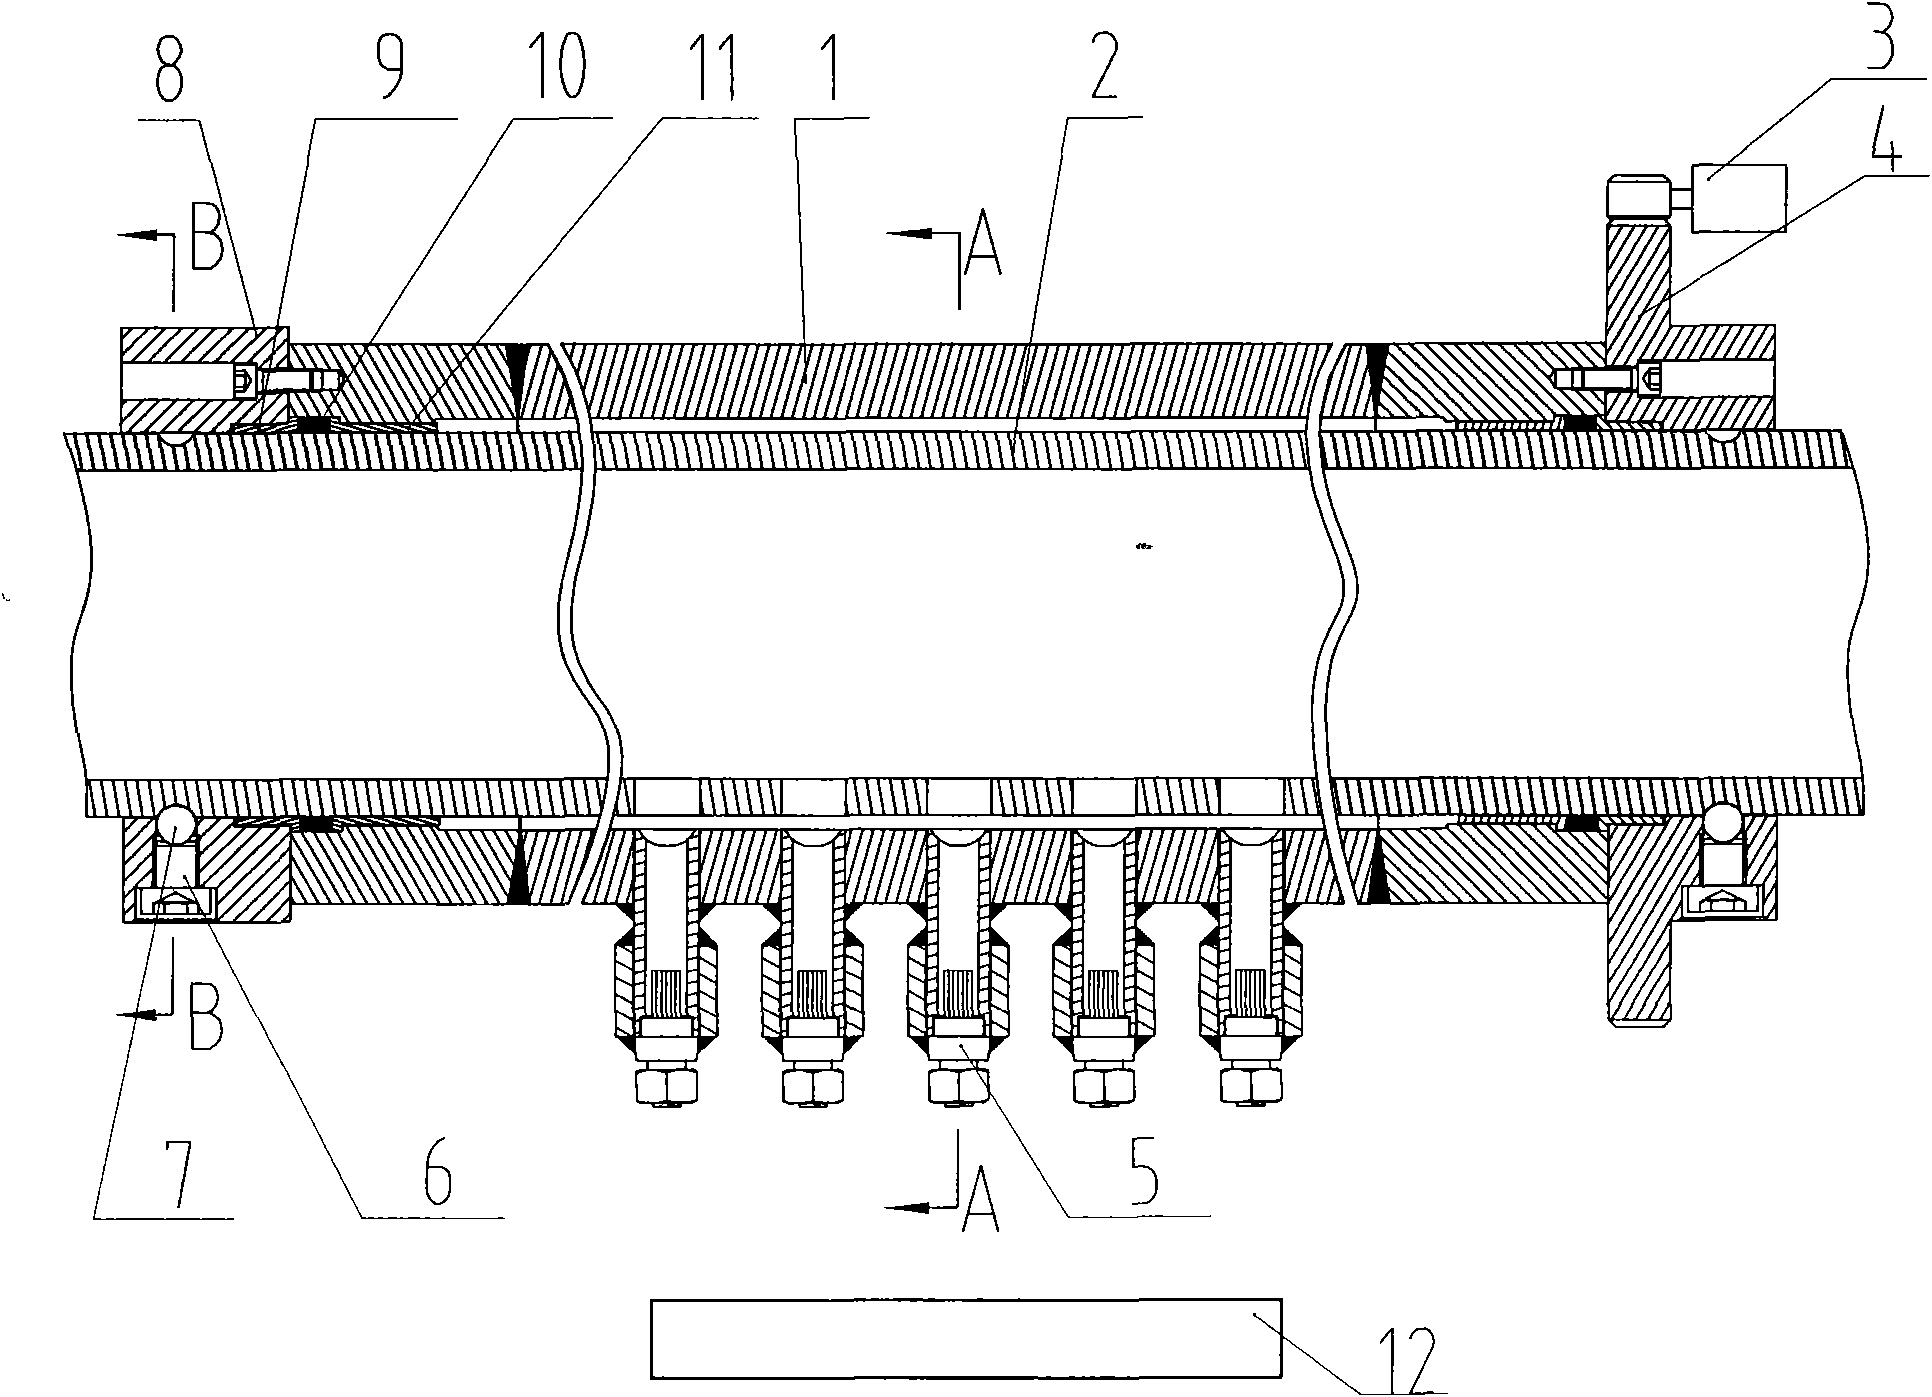 Self-enclosed coaxial equal-angle alternate rotary descaling header device